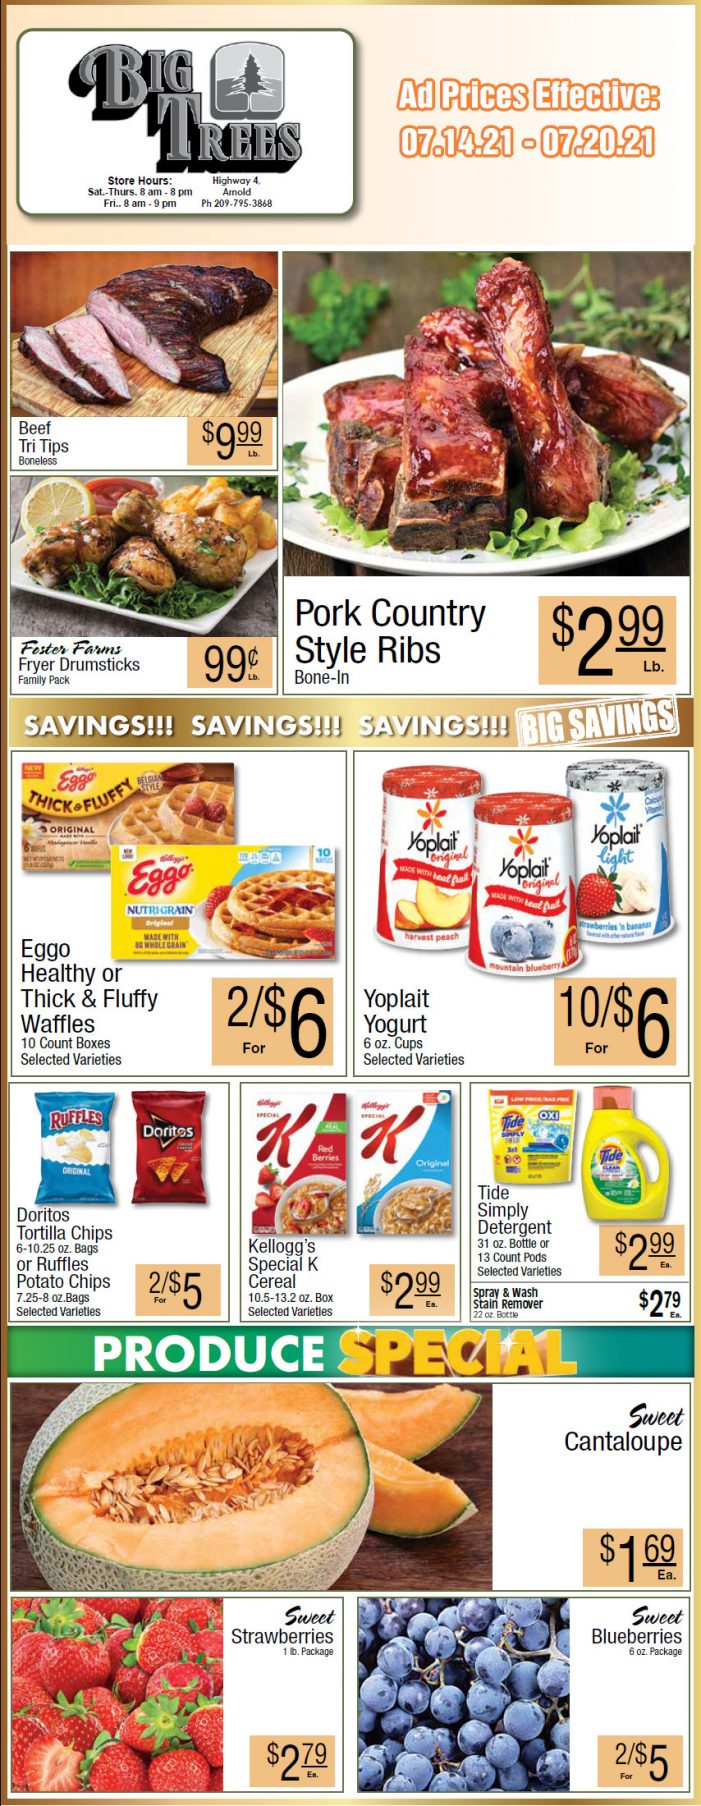 Big Trees Market Weekly Ad & Grocery Specials Through July 20th! Shop Local & Save!!